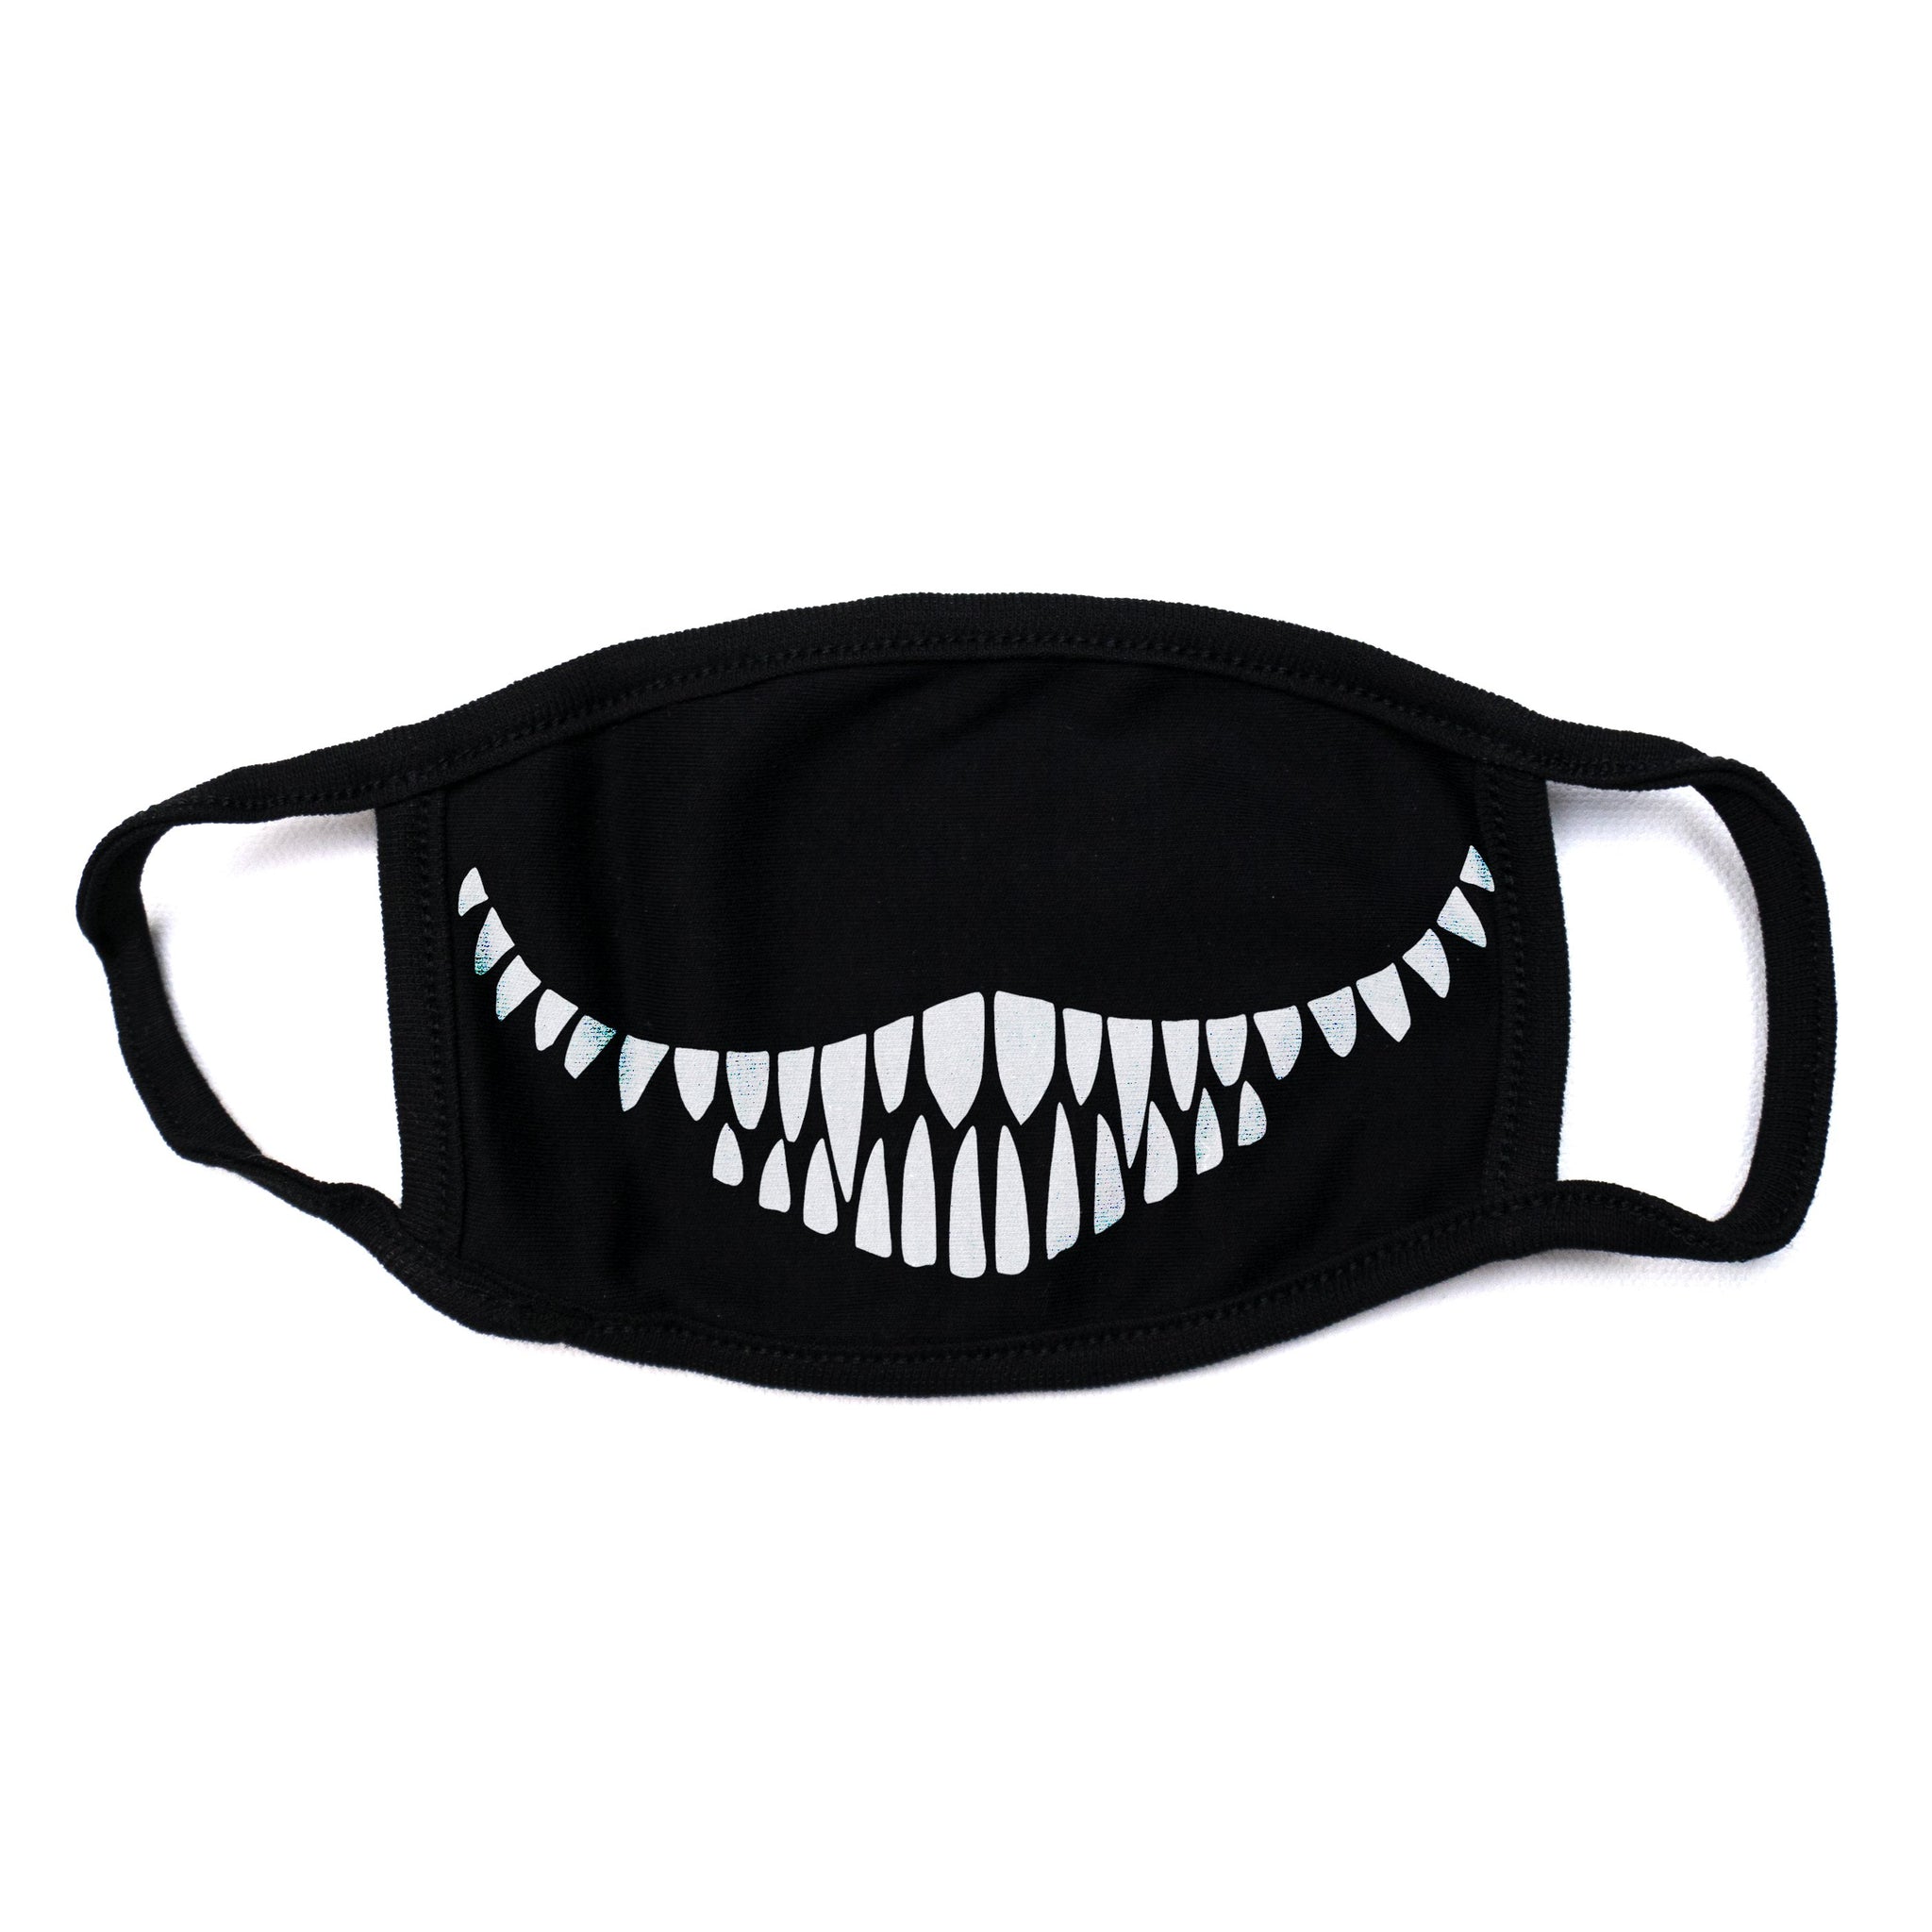 CHESHIRE GRIN DUST MASK